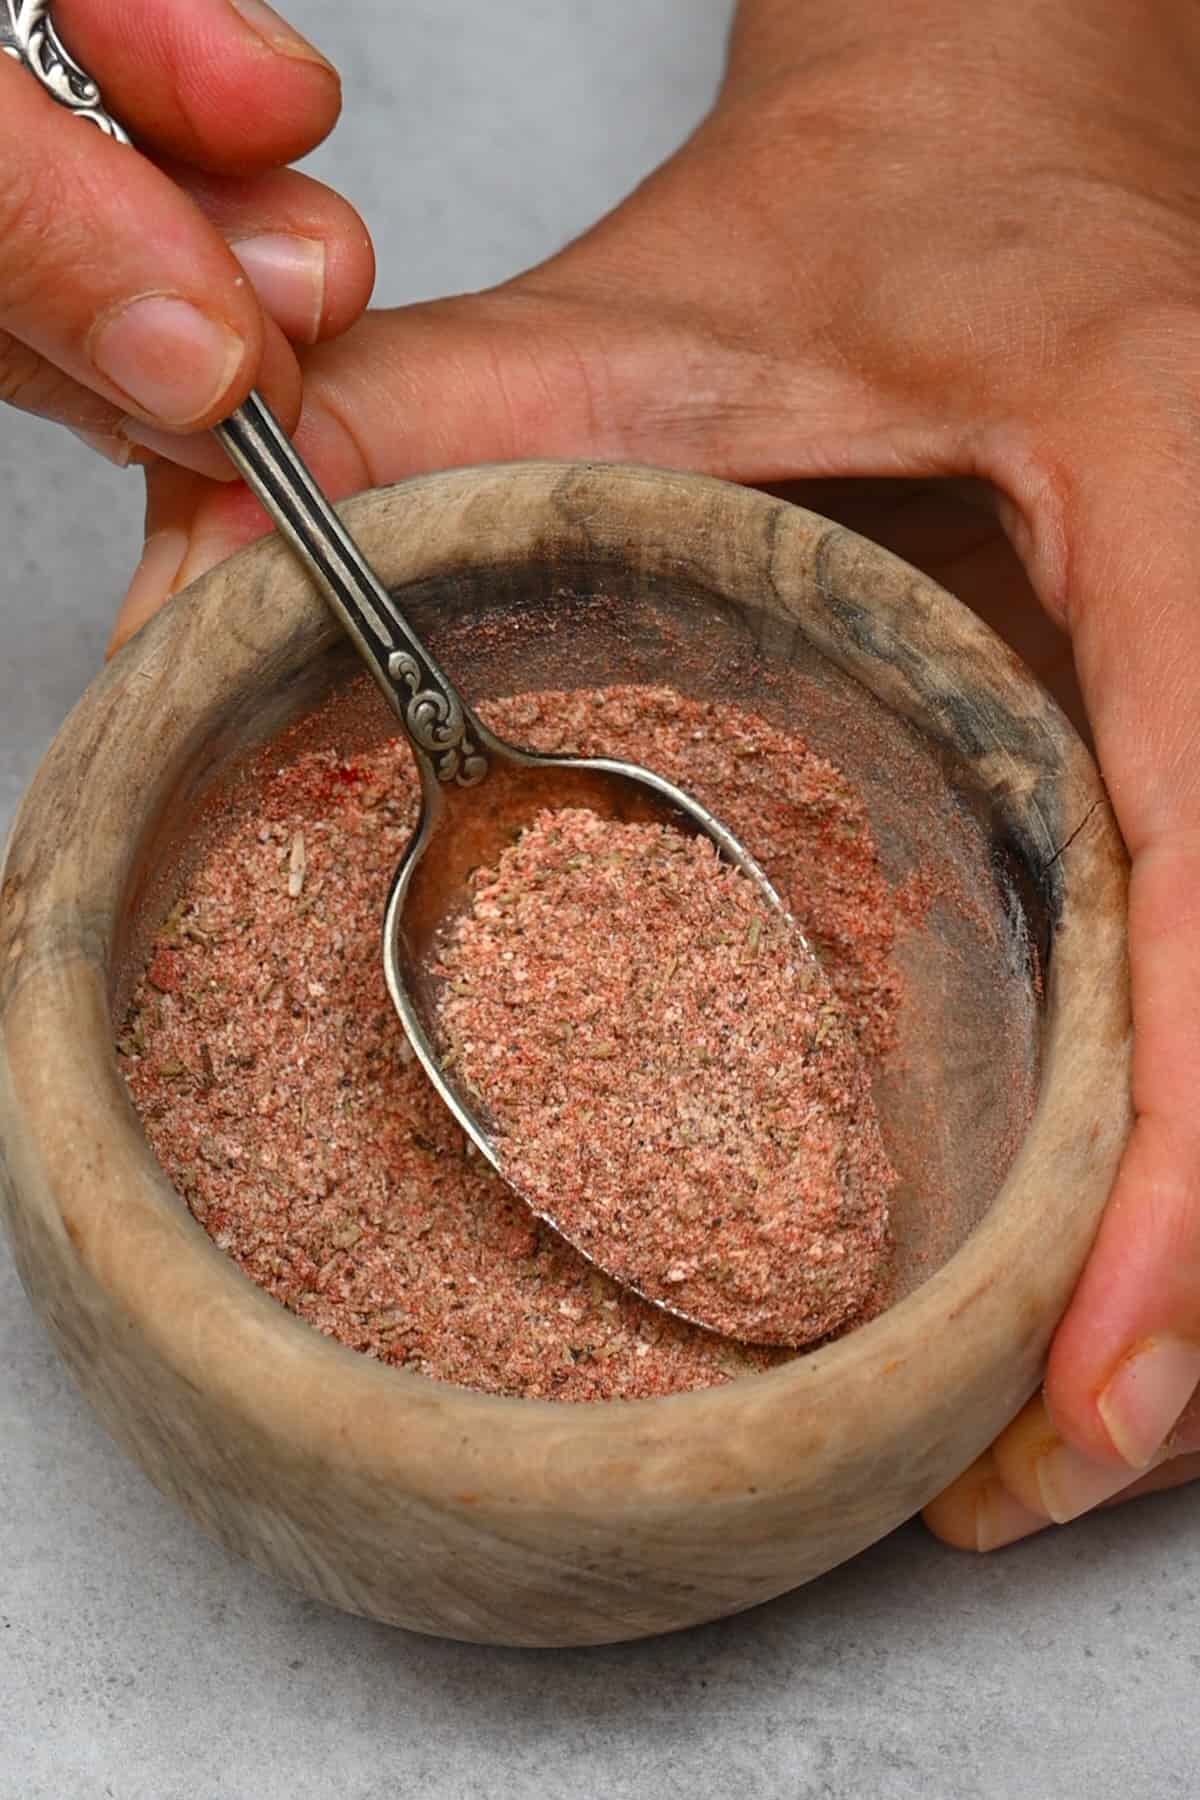 Mixing chicken seasoning in a small bowl with a spoon